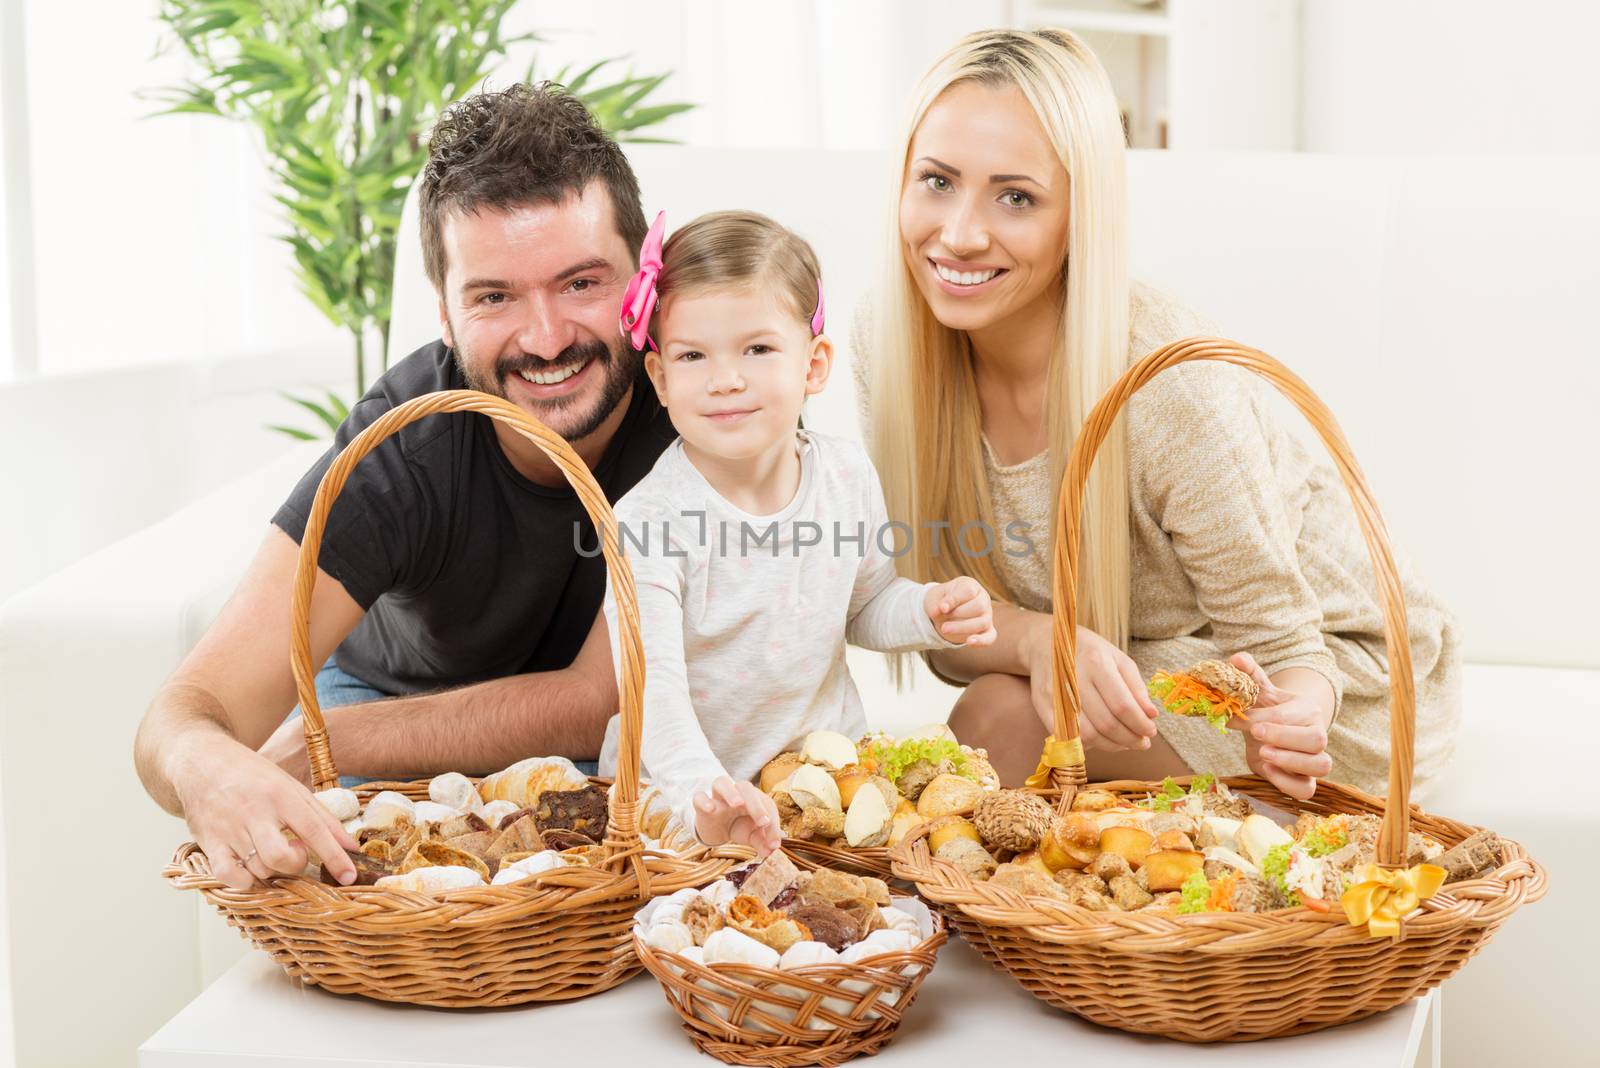 Happy family together, parents with daughter sitting on the couch in the living room in front of woven baskets filled with pastry.